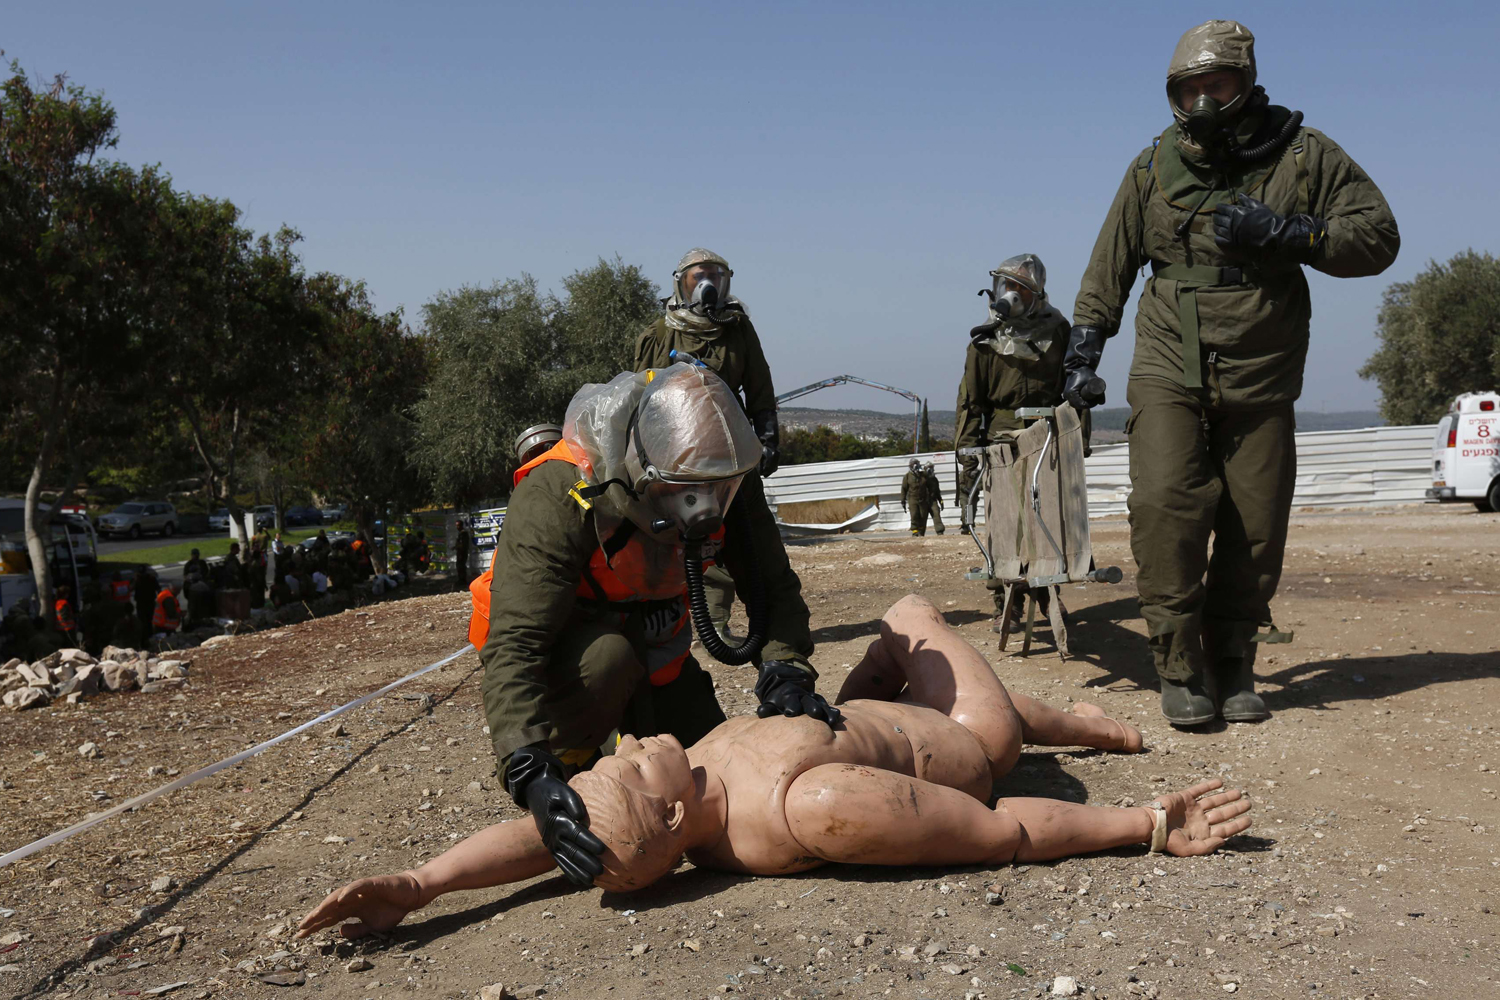 Oct. 2, 2013. An Israeli soldier from the home front command wearing protective gear kneels next to a dummy during a drill simulating a chemical attack in the town of Beit Shemesh, near Jerusalem.